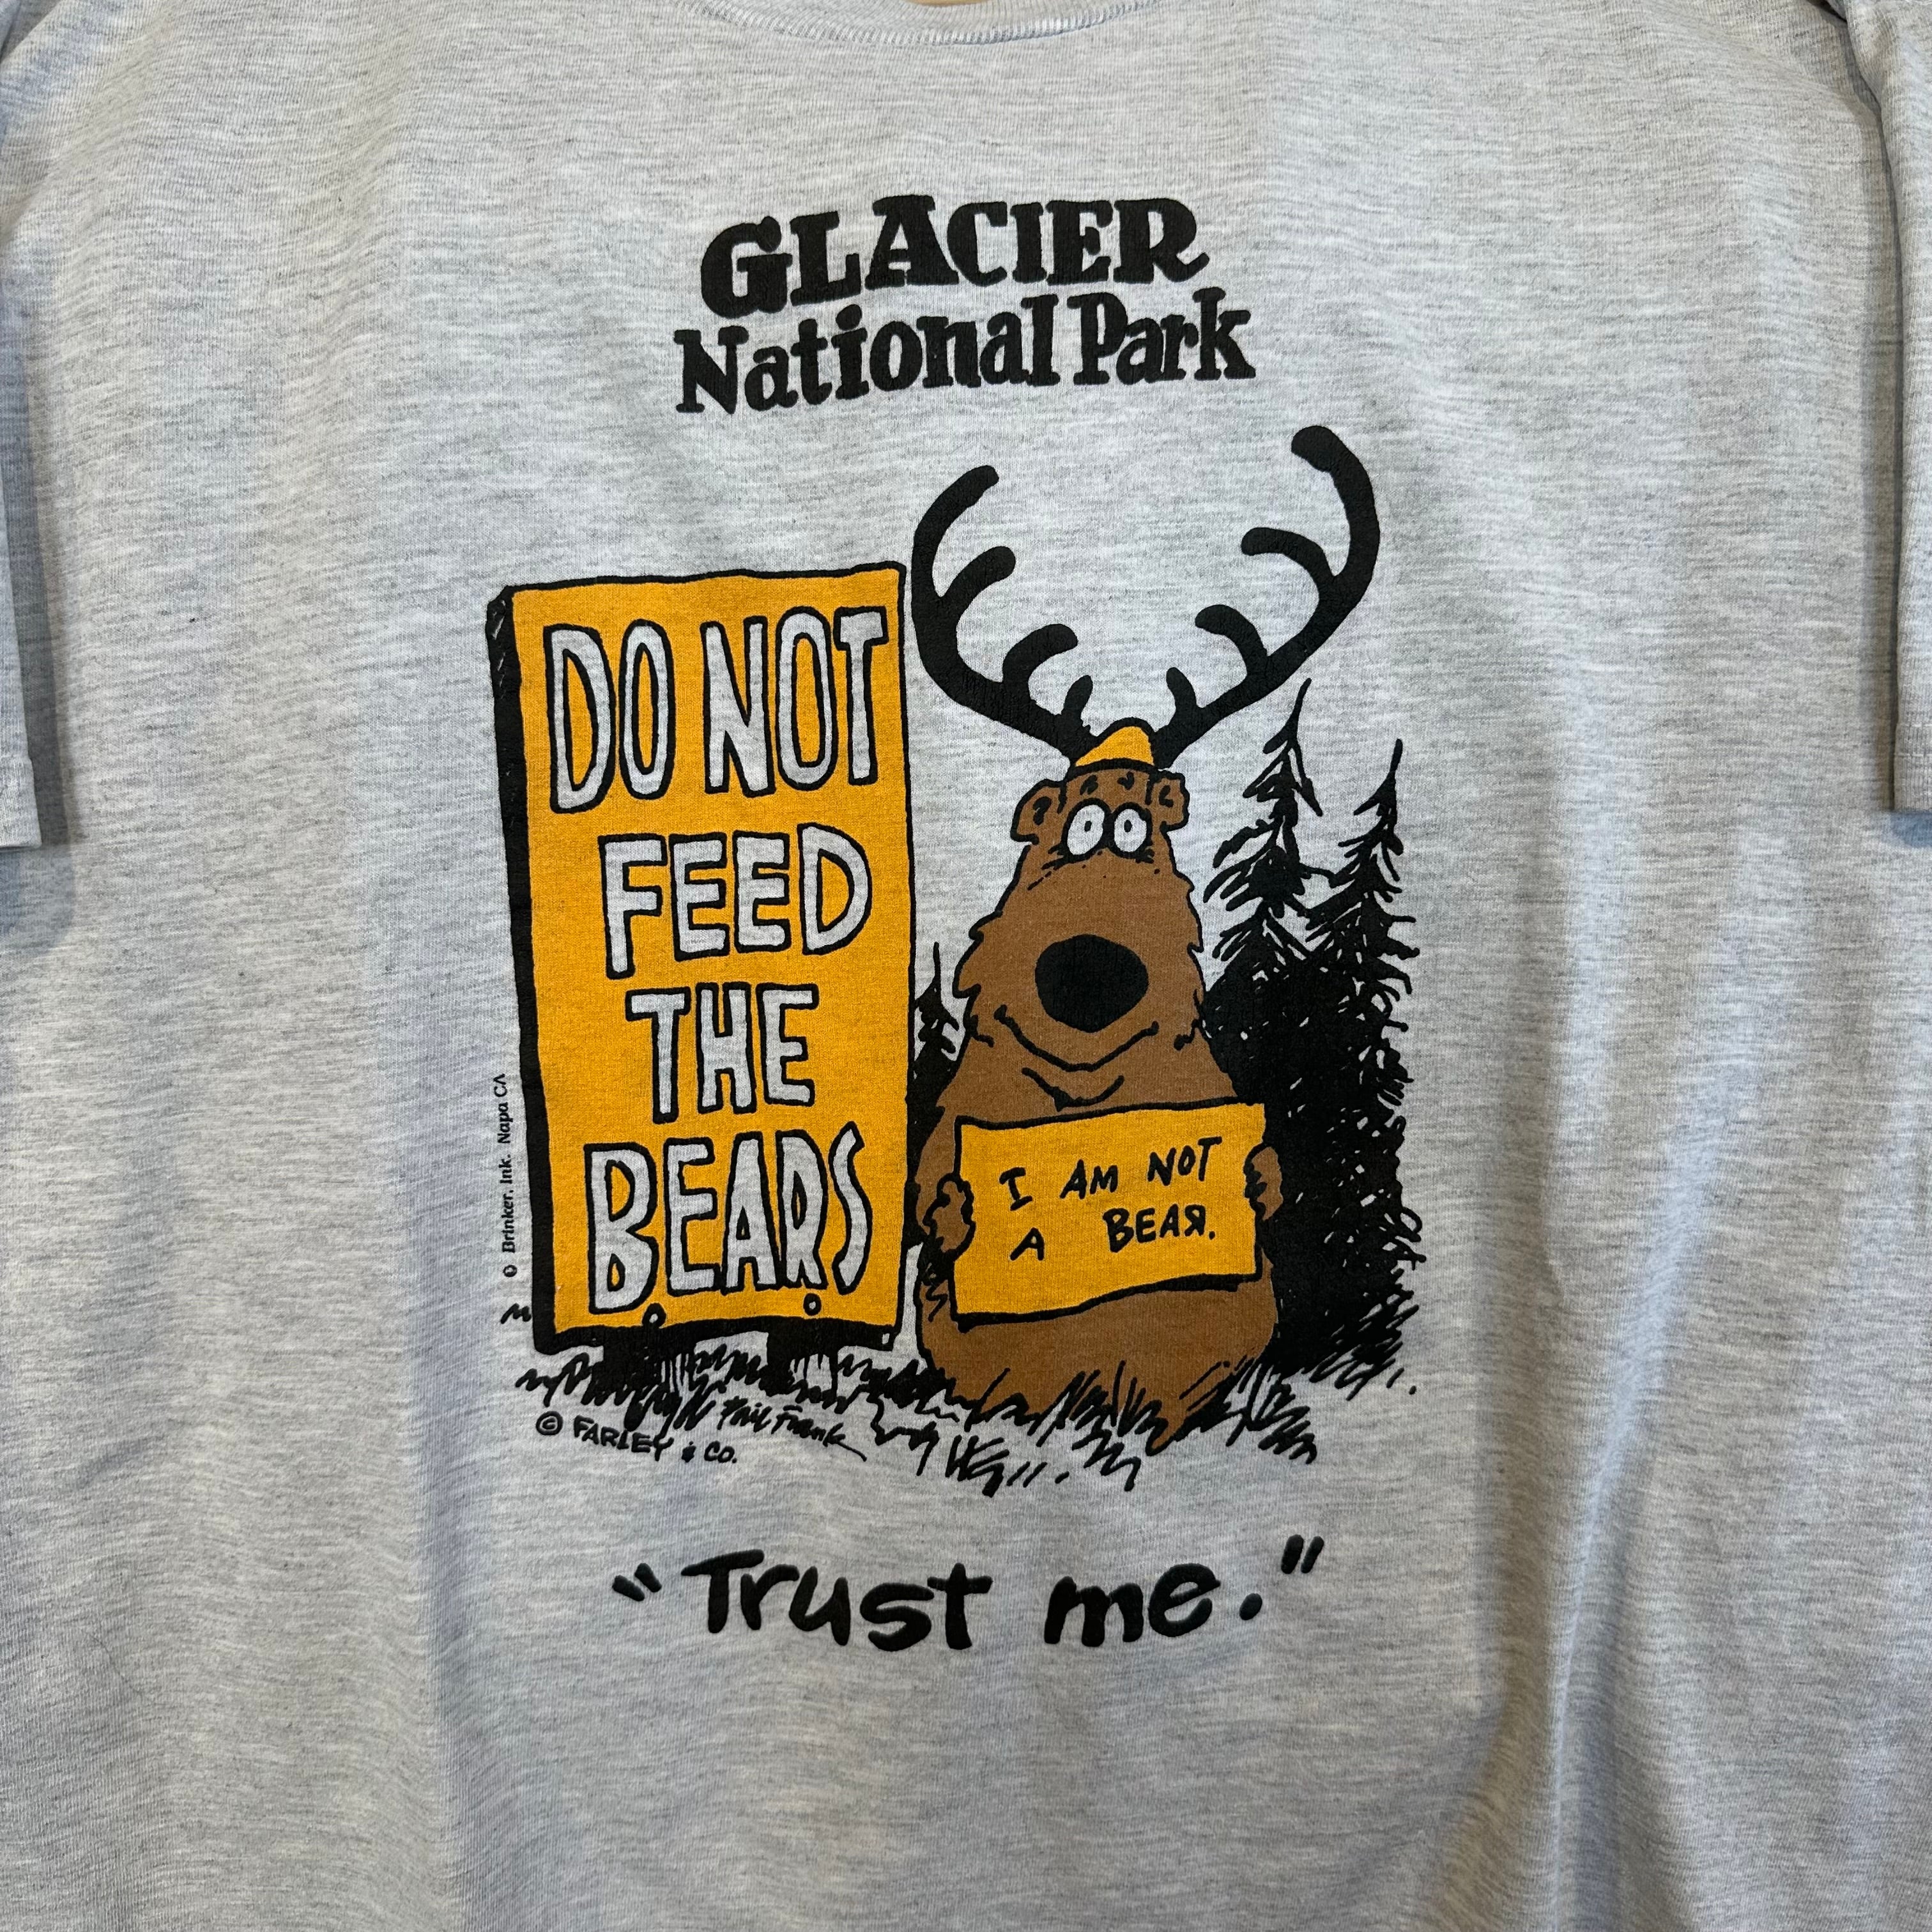 Glacier National Park “Don’t Feed the Bears” T-Shirt